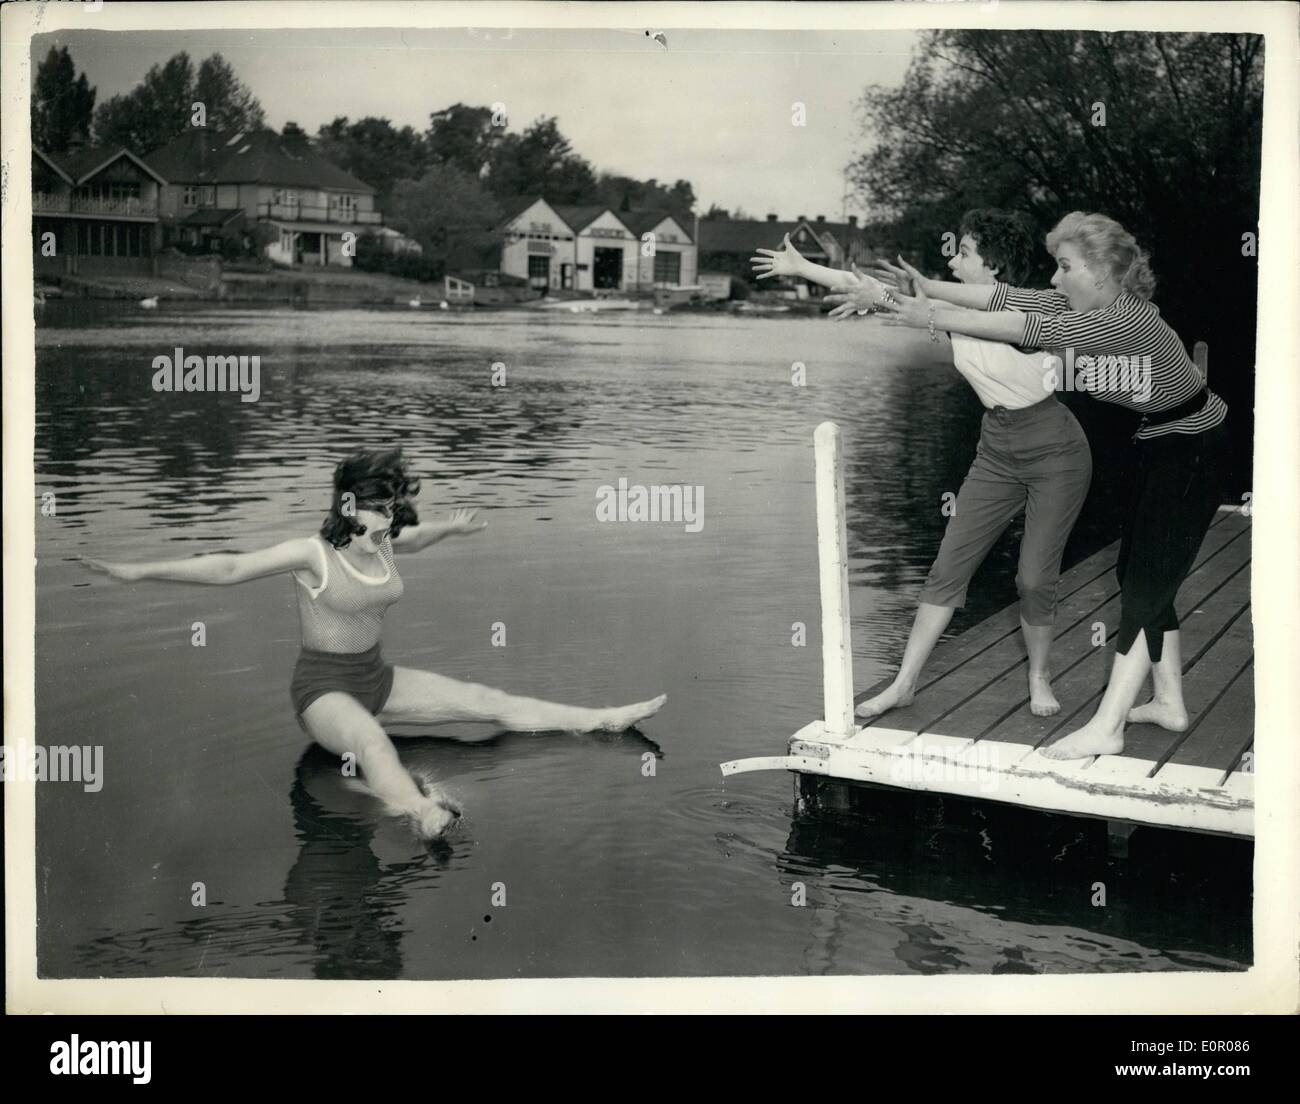 May 24, 1957 - 24-5-57 Television lovelies rehearse by the river. B.B.C. Pleasure Boat series. Three lovely young ladies are busy on the river at Maidenhead, rehearsing for the new B.B.C. Television show Pleasure Boat series, starting on May 31st. They are June Wilkinson (17) of Eastbourne, Rita Joyce (20) of Shepherd's Bush and Anette Donati (20) of Leeds. With three others they will cruise down the river accompanied by Kenneth Horne, Michael Holliday and George Martin Stock Photo